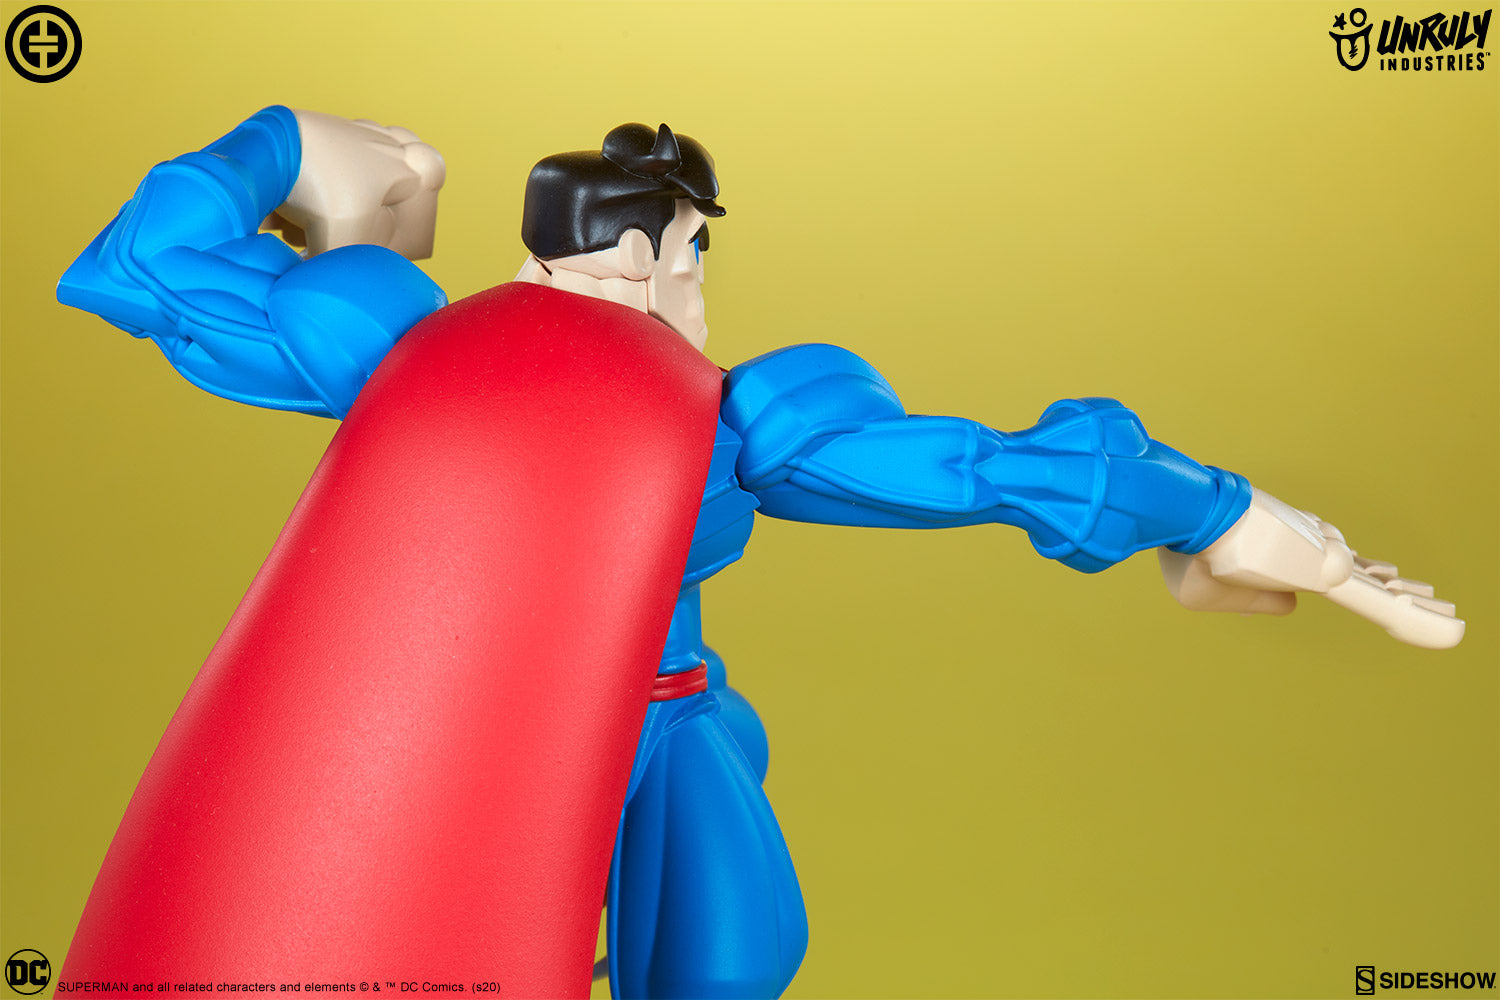 Sideshow Collectibles - Unruly Industries - Superman